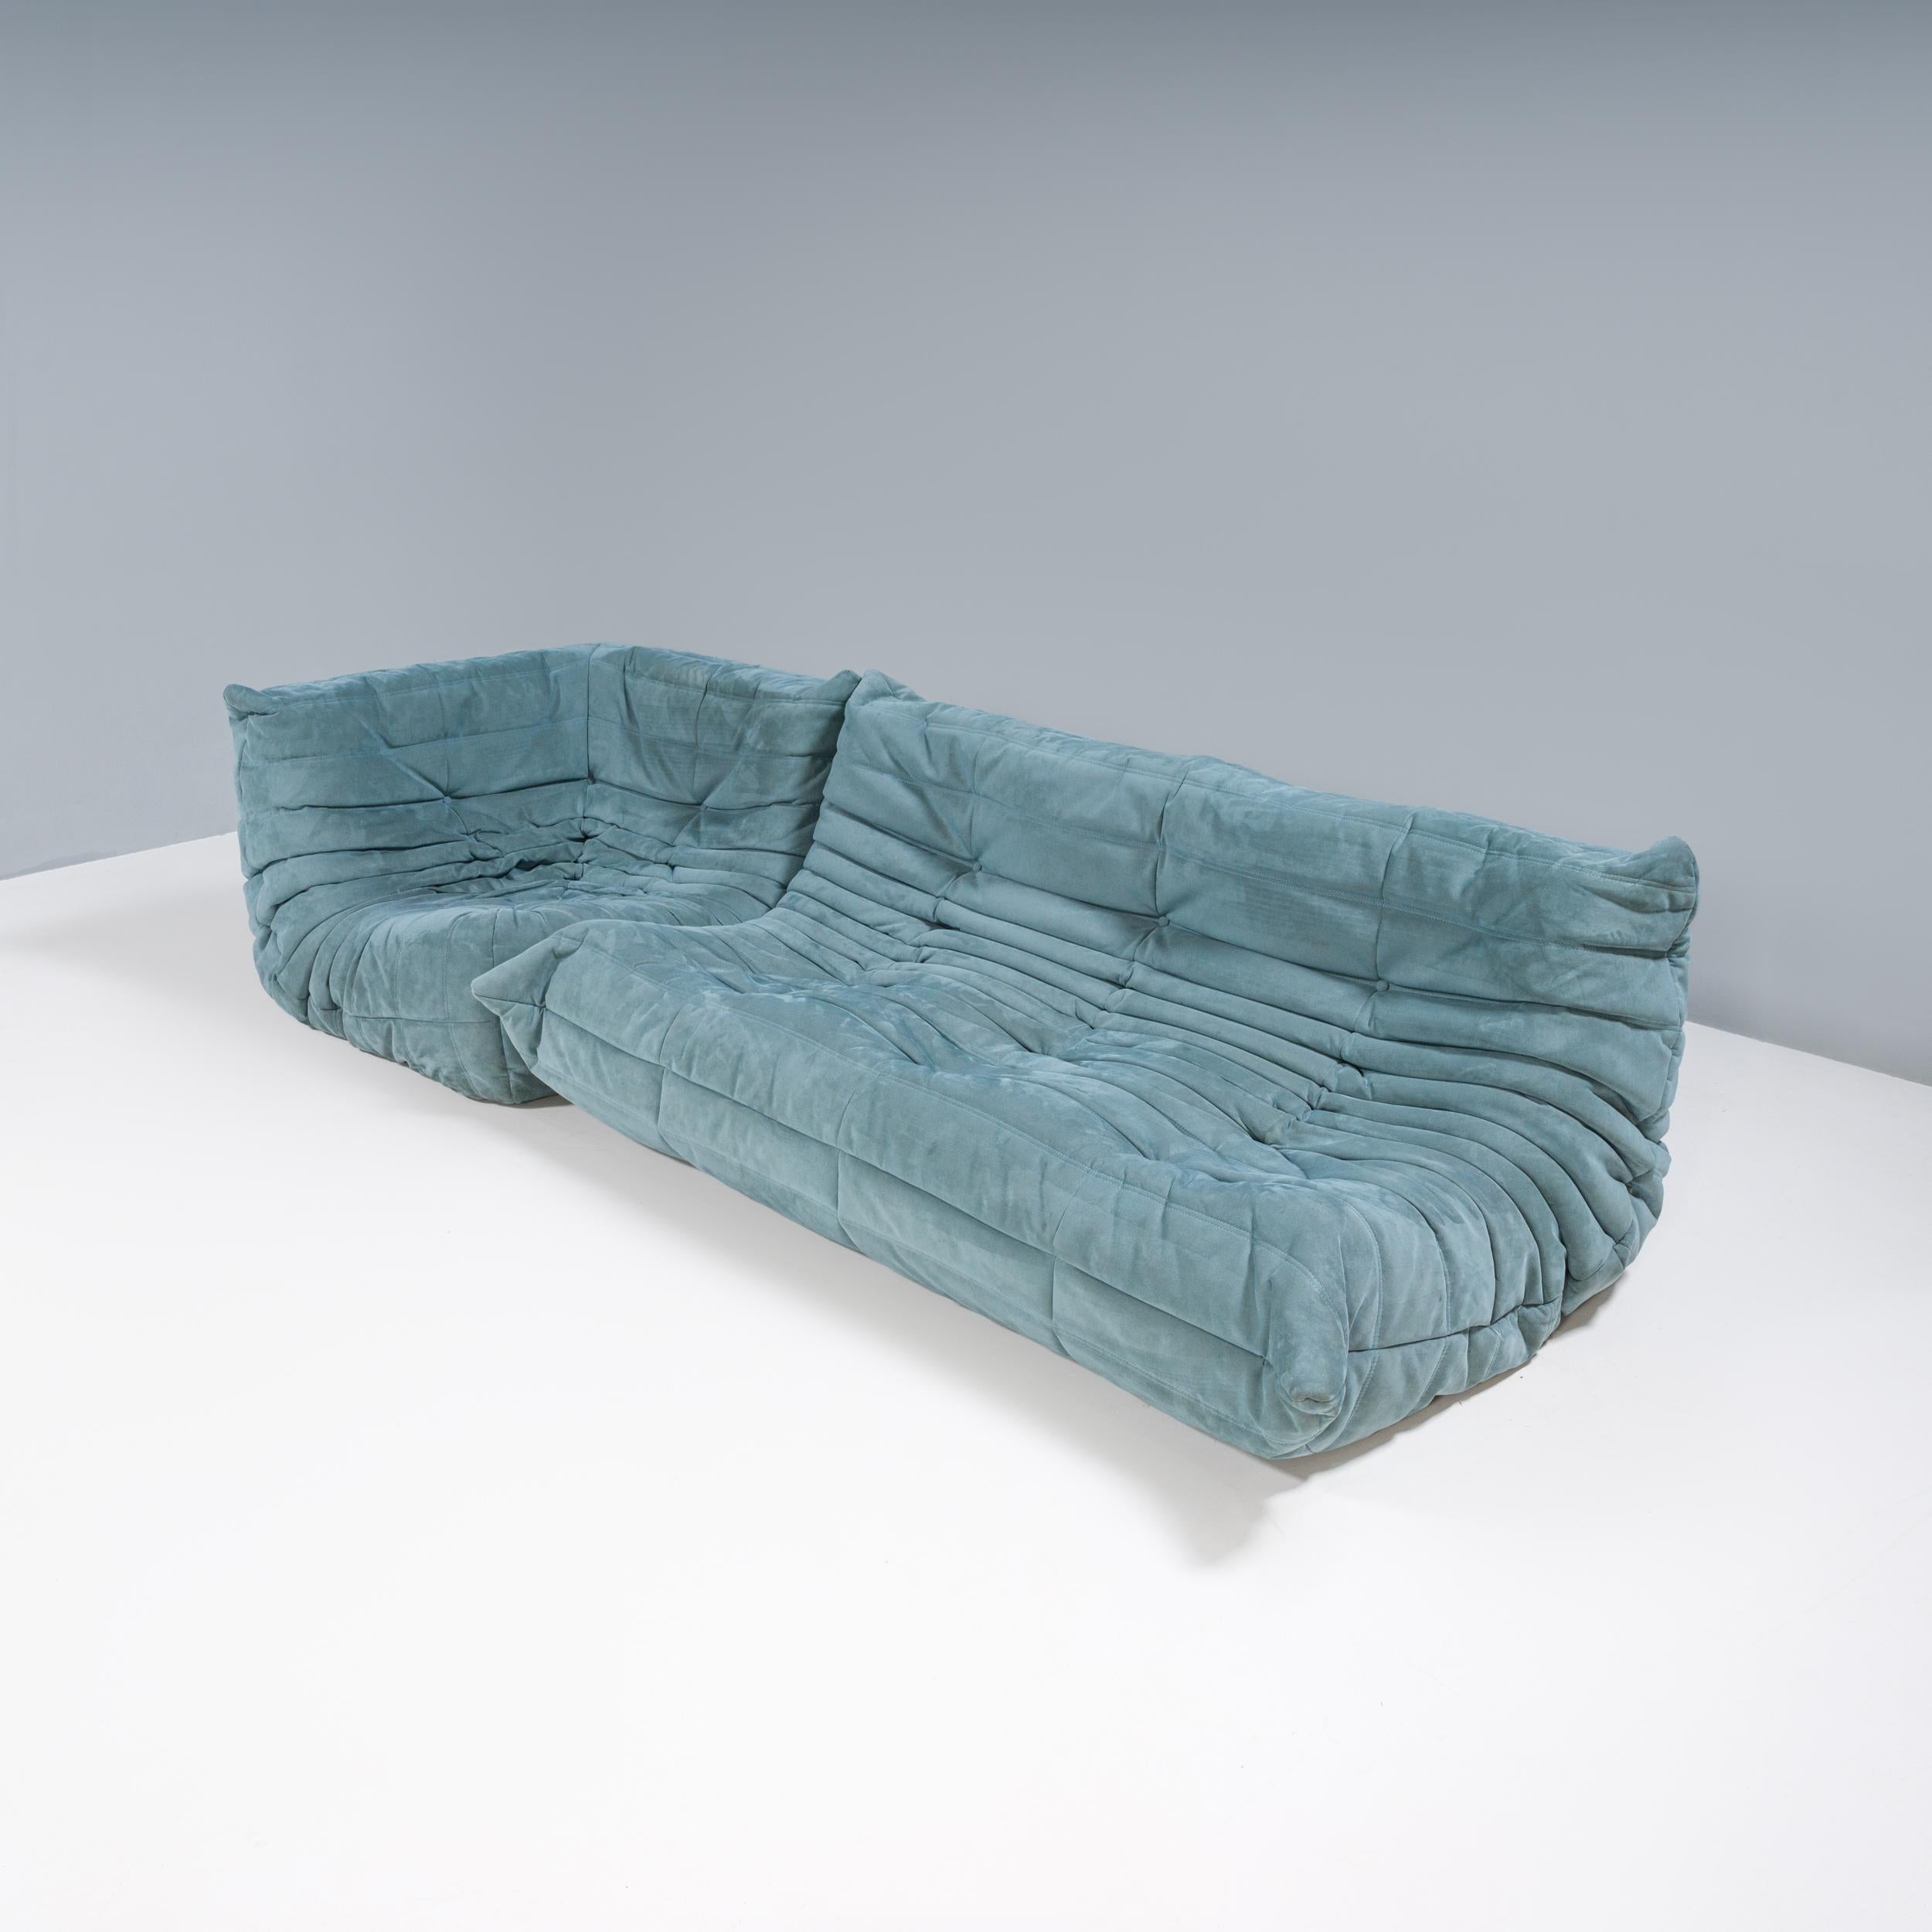 The iconic Togo sofa, originally designed by Michel Ducaroy for Ligne Roset in 1973, has become a design classic.

This versatile two-piece modular set can be configured into one corner sofa or used as two separate seats.

Comprising a large